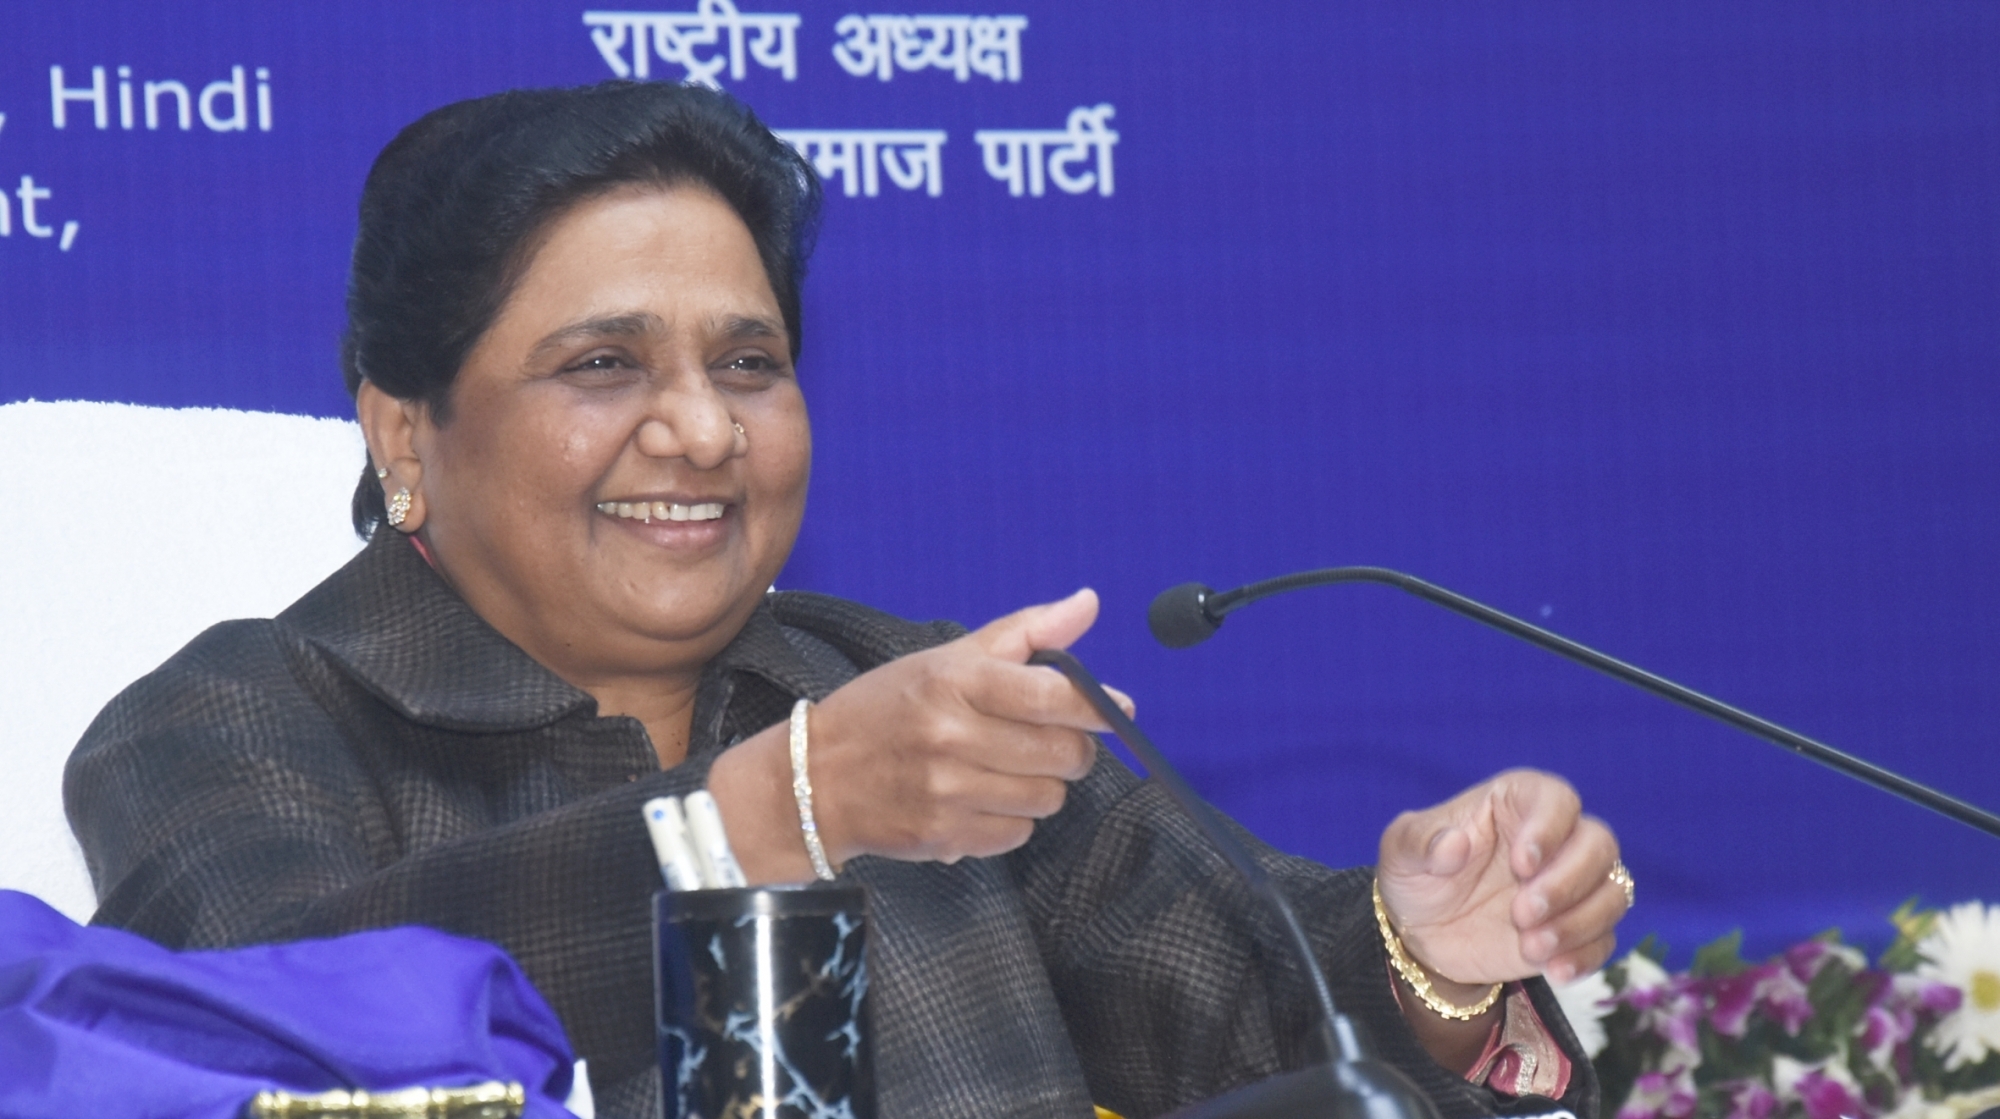 Media and BJP should not distort oral observation of Supreme court, says Mayawati